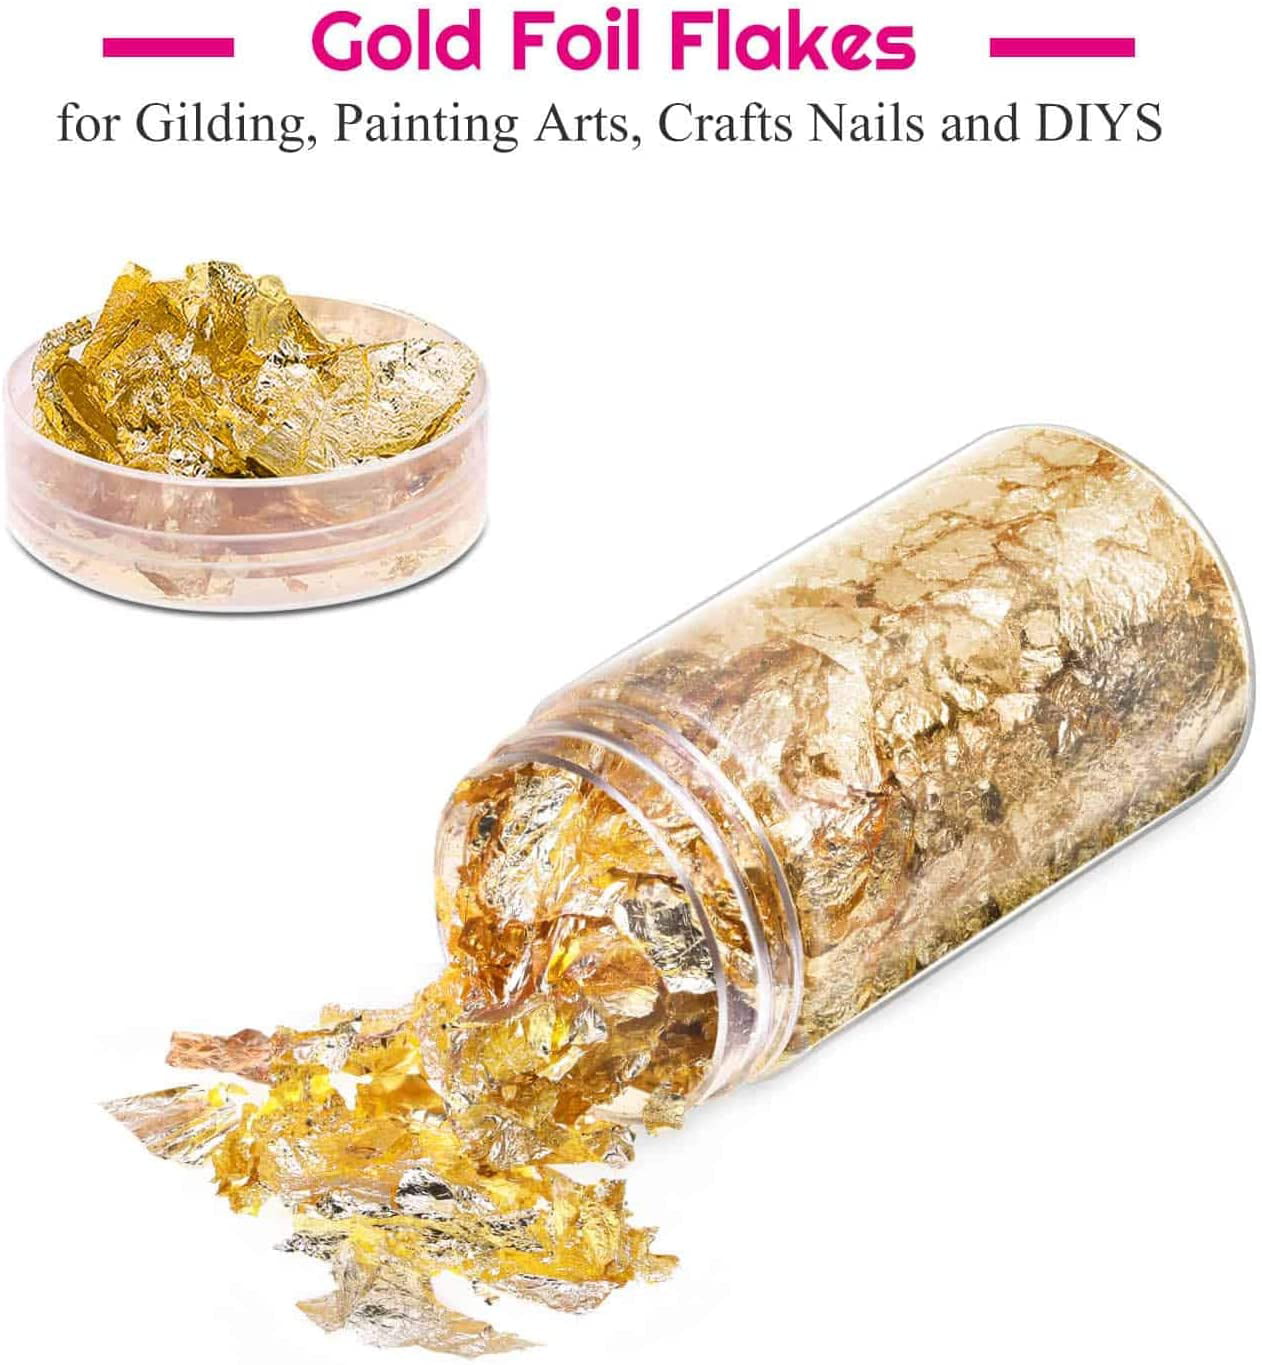 Imptora WFAUIBR Gold Foil Flakes for Resin,3 Bottles Metallic Foil Flakes 15g,Gold Flakes for Crafts,Flakes for Nail Art, Painting,Slime and Resin Jewelry